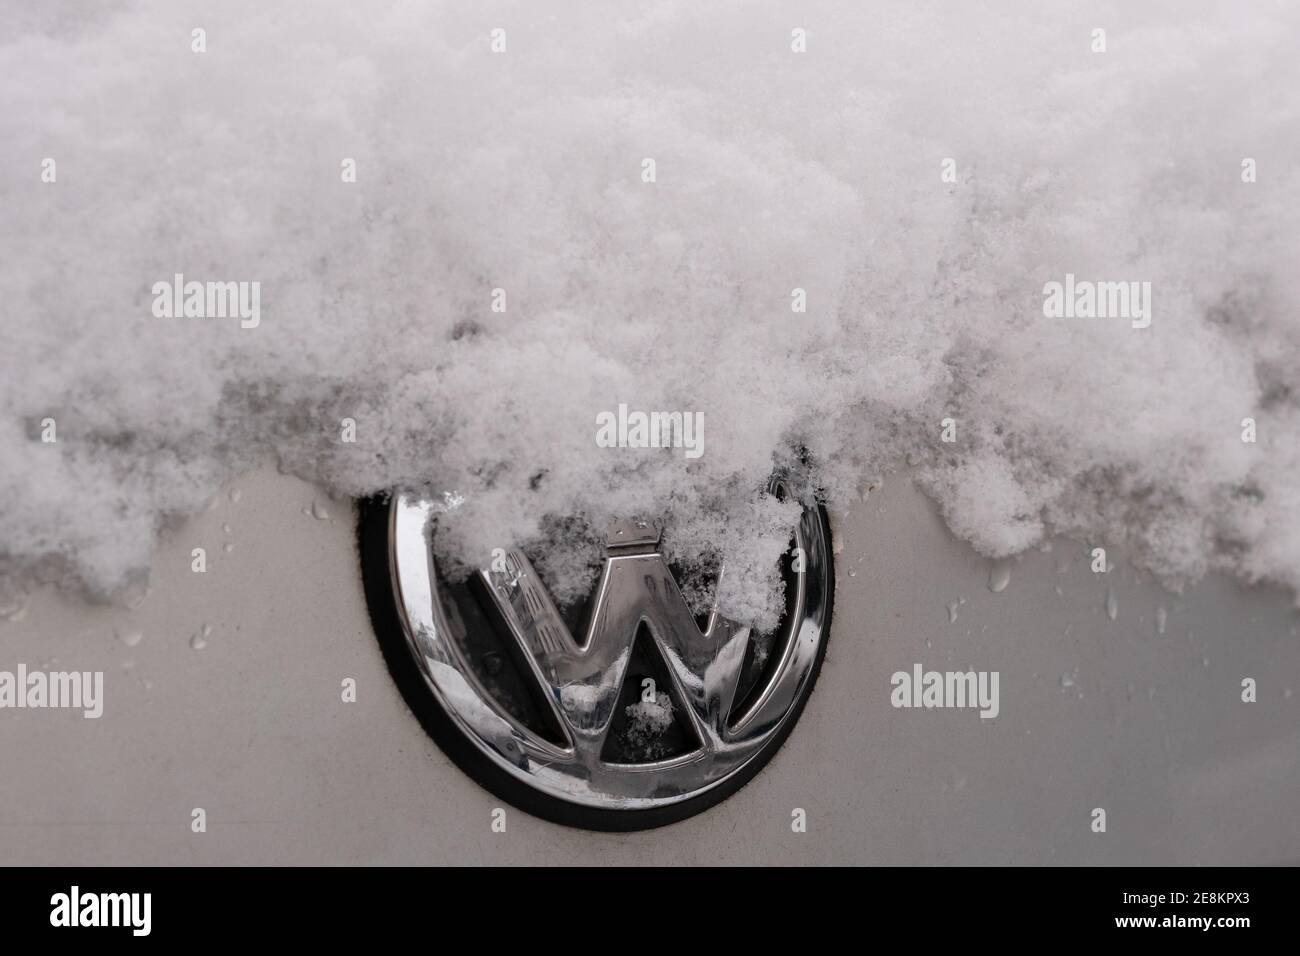 BERLIN, GERMANY - JANUARY 30, 2021: Close-up of A Snow-capped VW Logo On A Car In Berlin, Germany Stock Photo